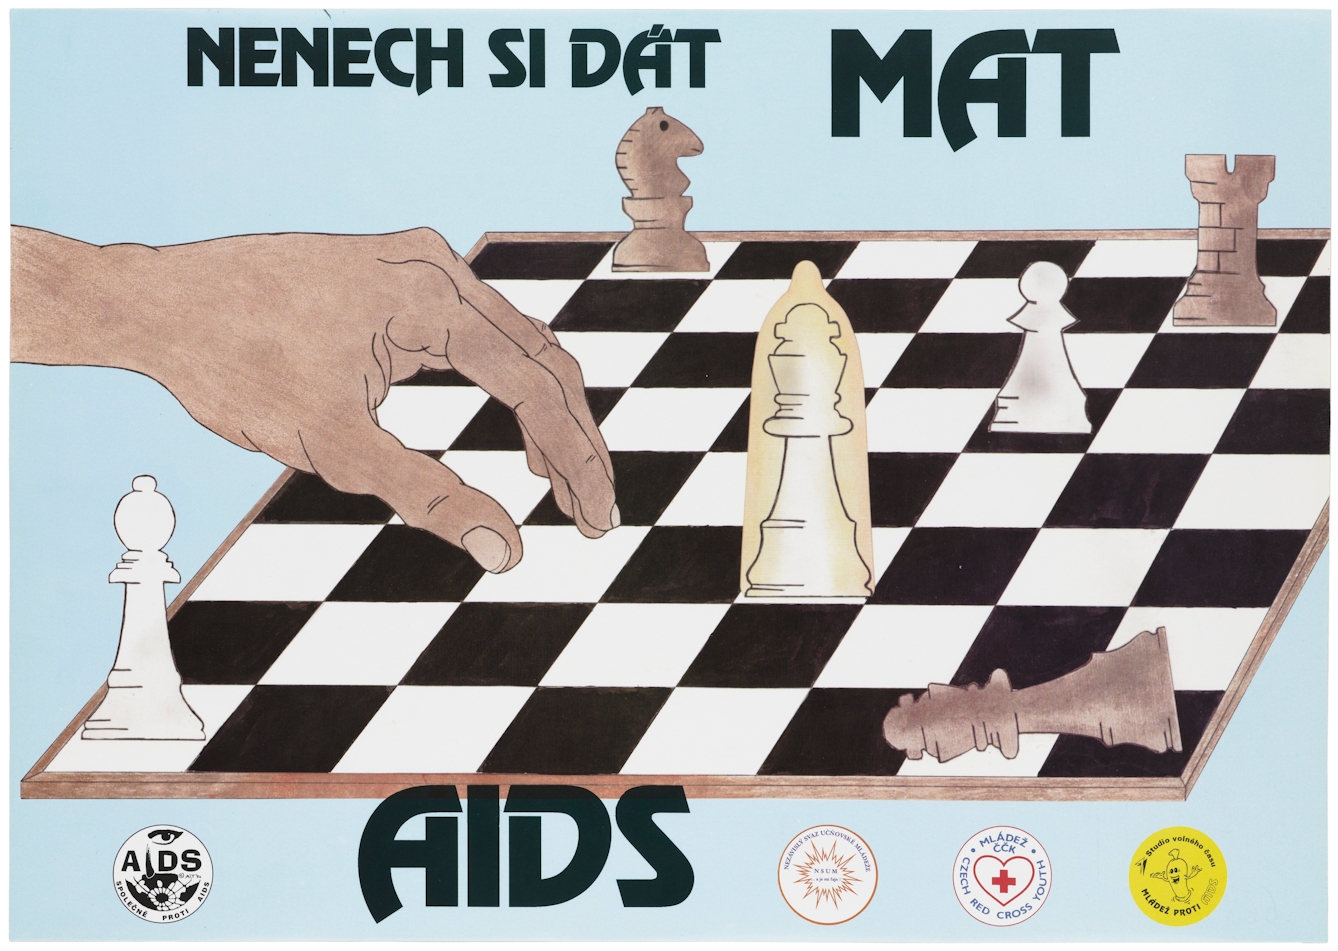 A colour lithograph showing a hand hanging over a chessboard has made its last move: white wins because the white king is protected by a condom; representing protection against AIDS.